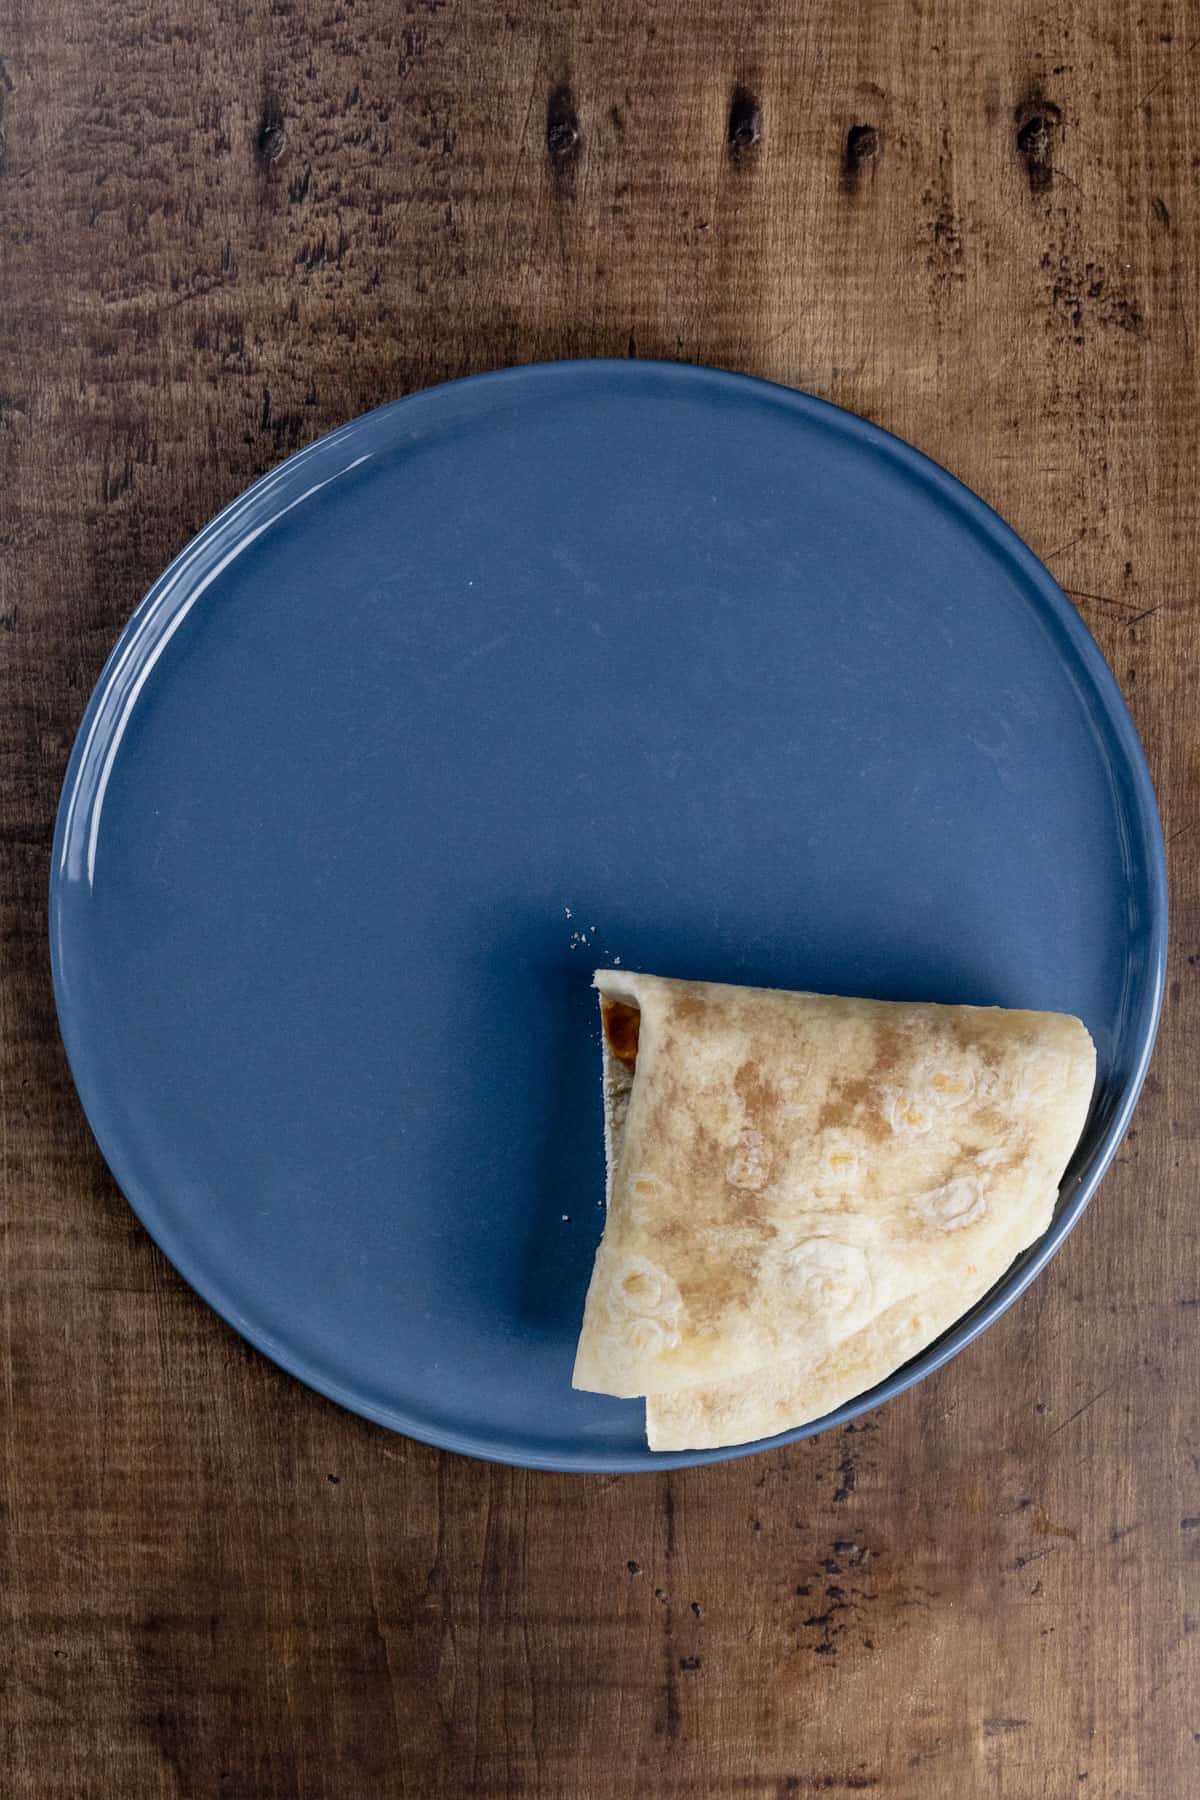 Showing the final step of folding it into a triangle on a blue plate.